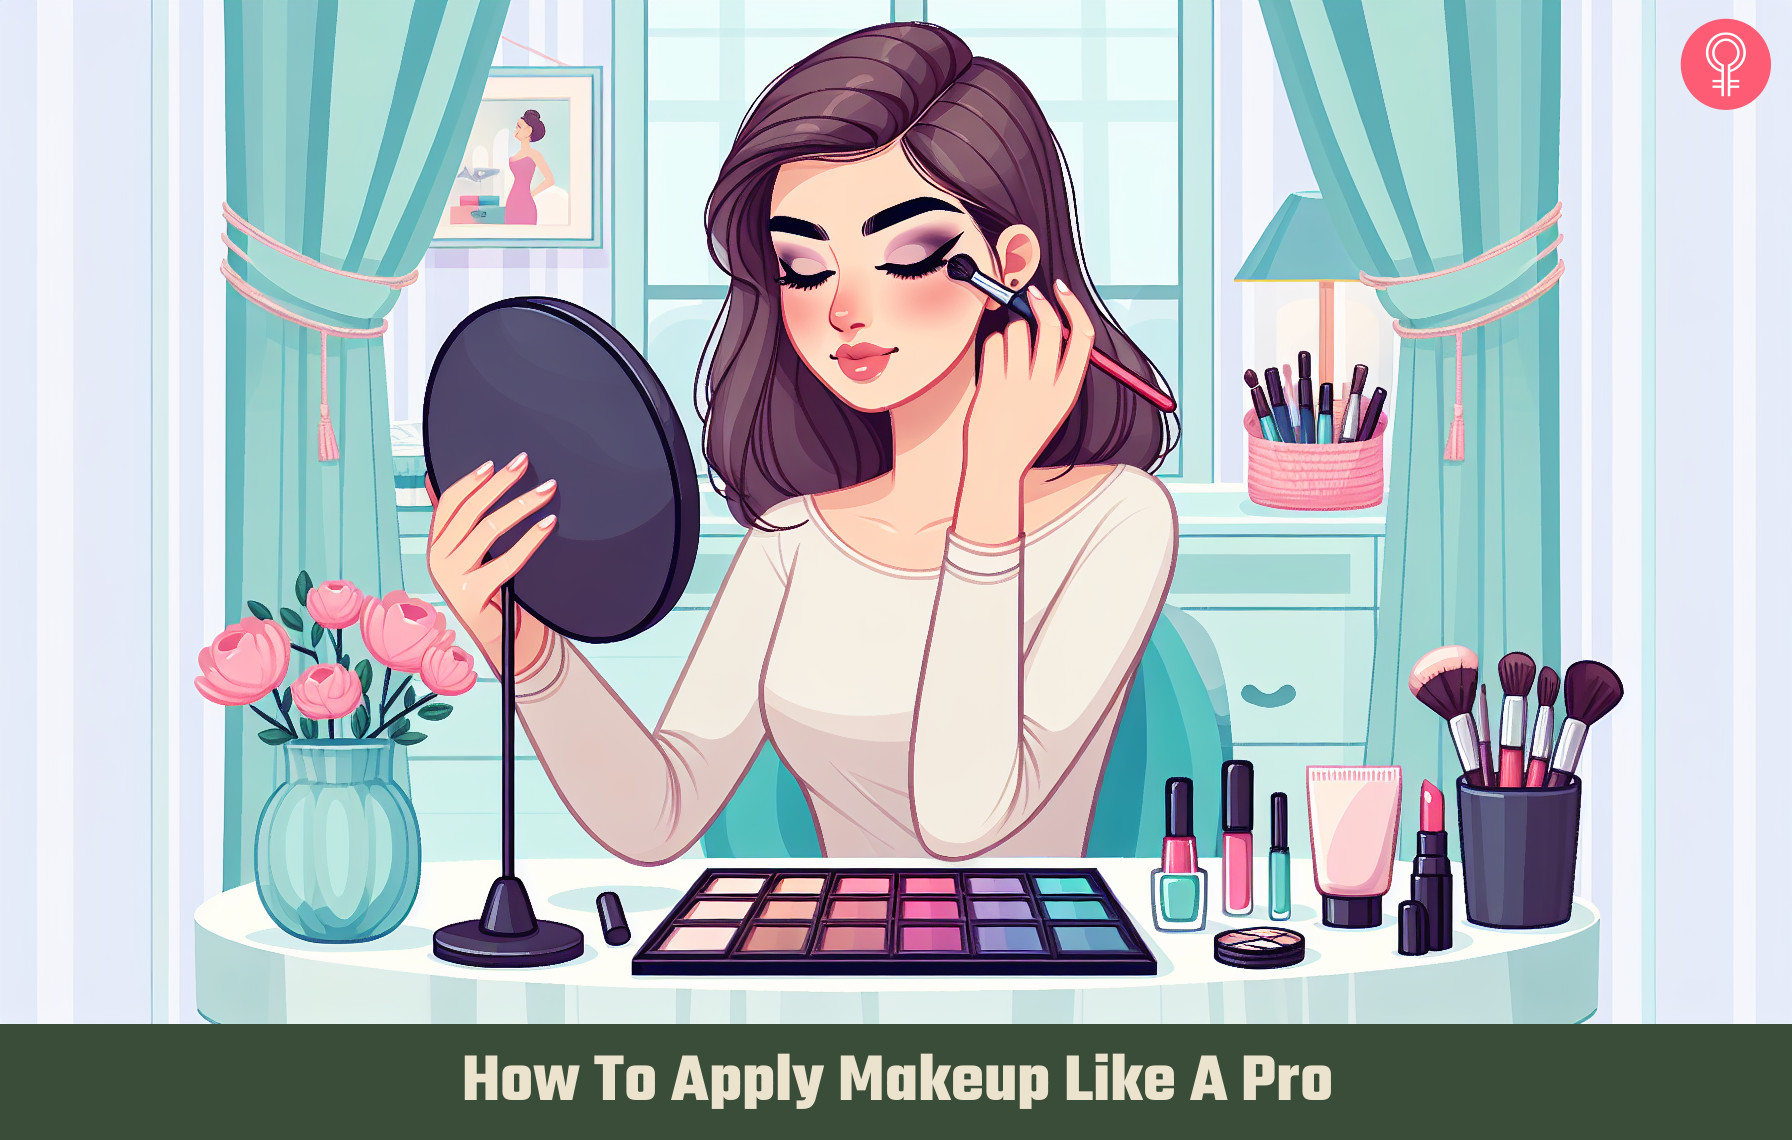 How to apply makeup